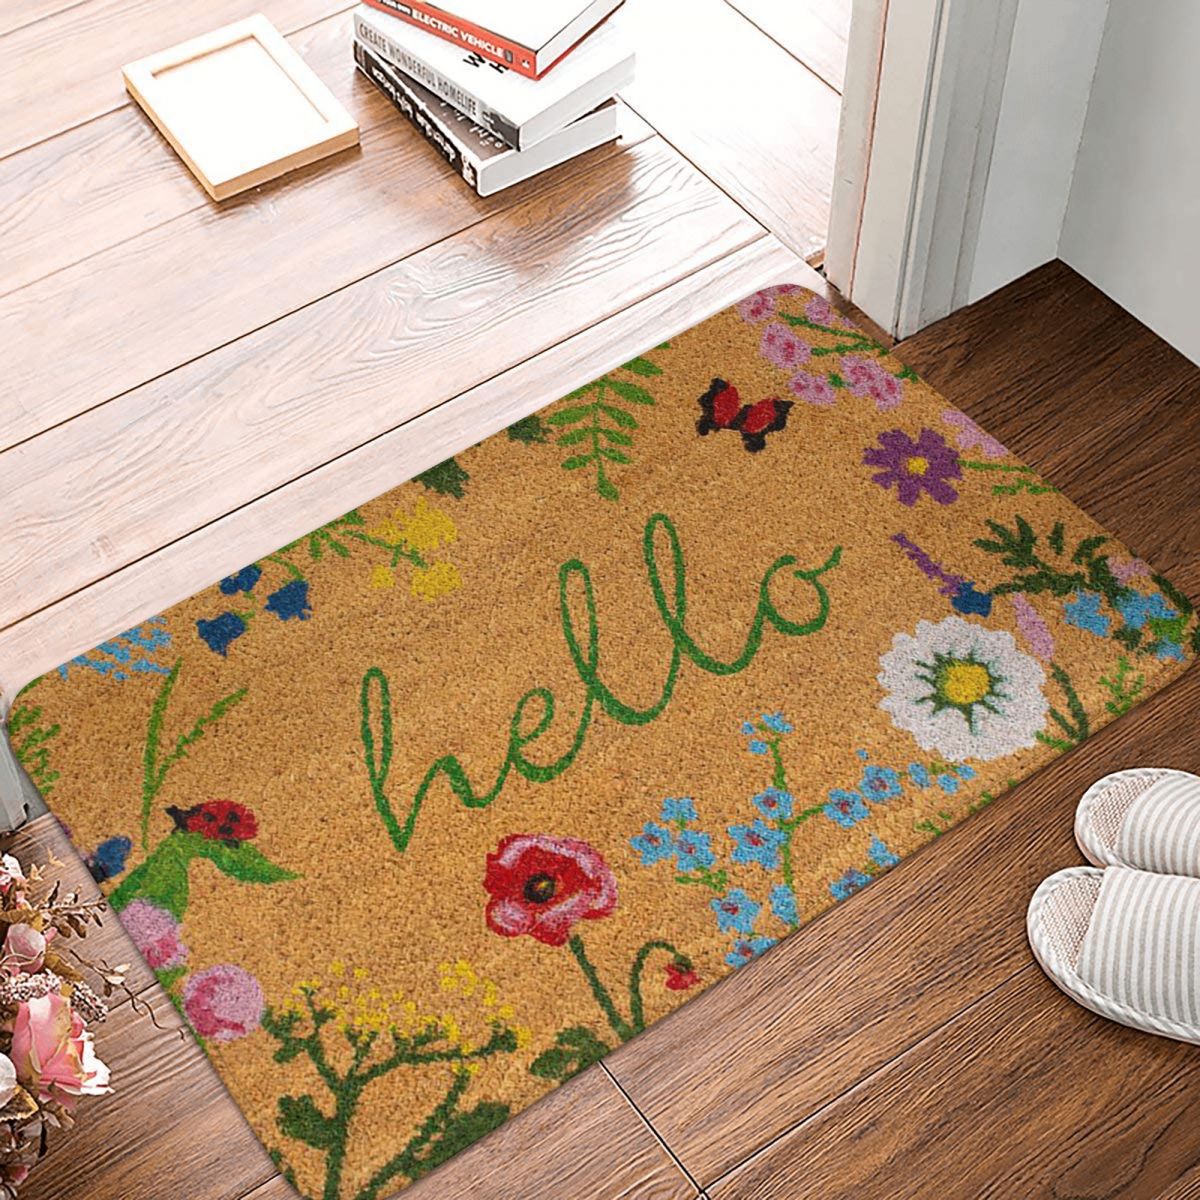 Beyond the Threshold: The Cultural Significance of Doormats